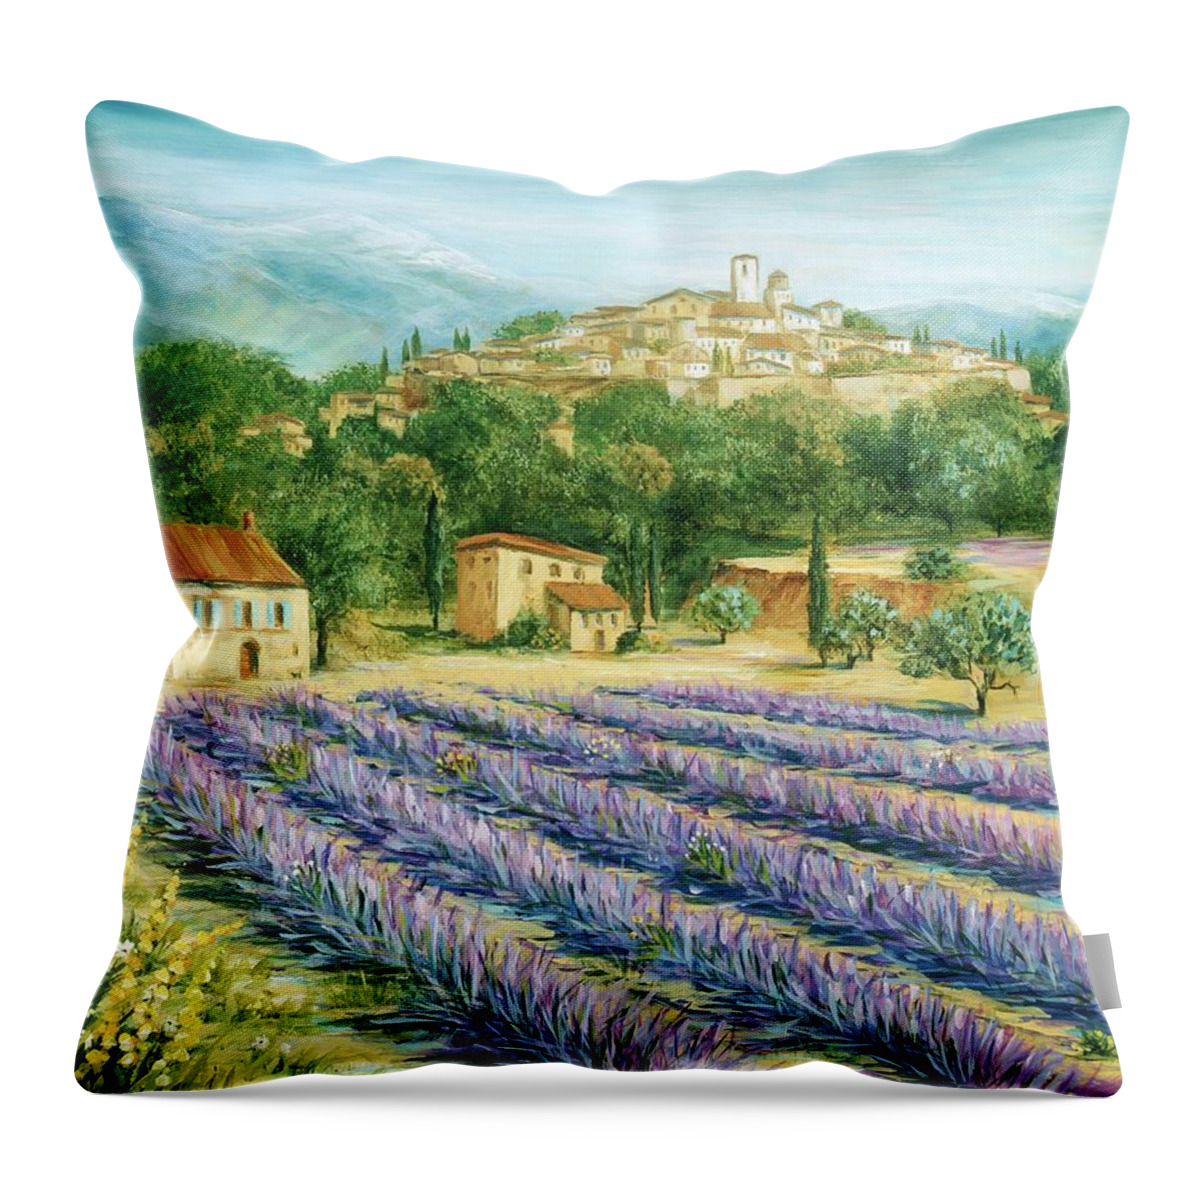 Europe Throw Pillow featuring the painting Saint Paul de Vence and Lavender by Marilyn Dunlap